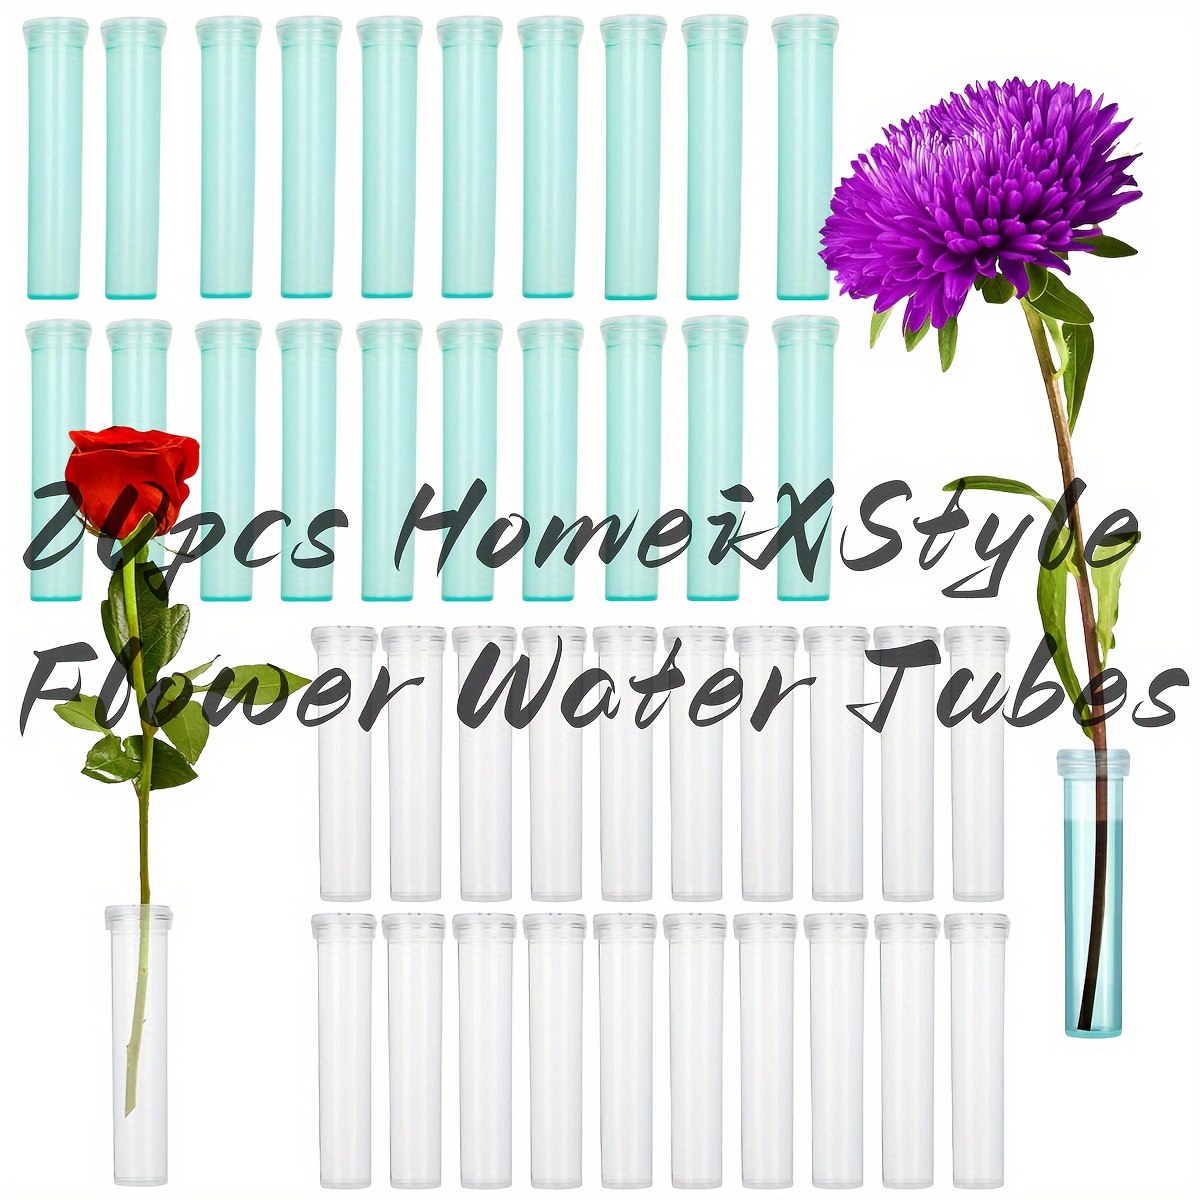 

20pcs Flower Water Tubes 2.8 Inch Plastic Water Tubes For Flowers Floral Vials With Caps For Decoration Flower Arrangement